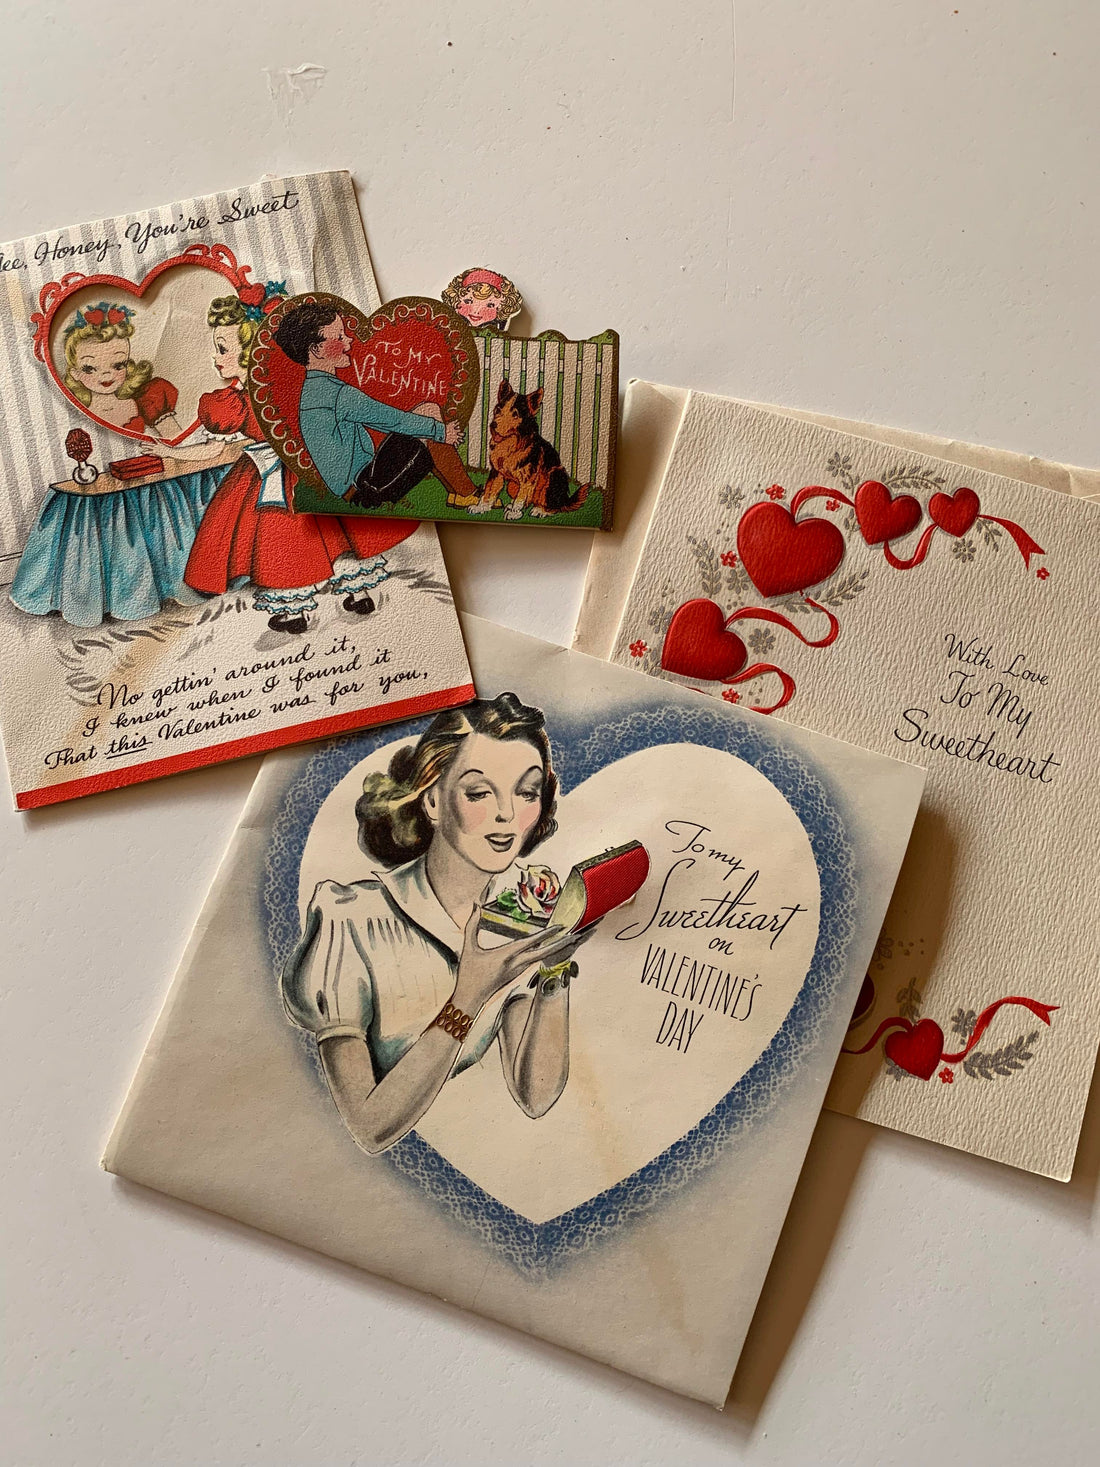 Valentines within The Letters